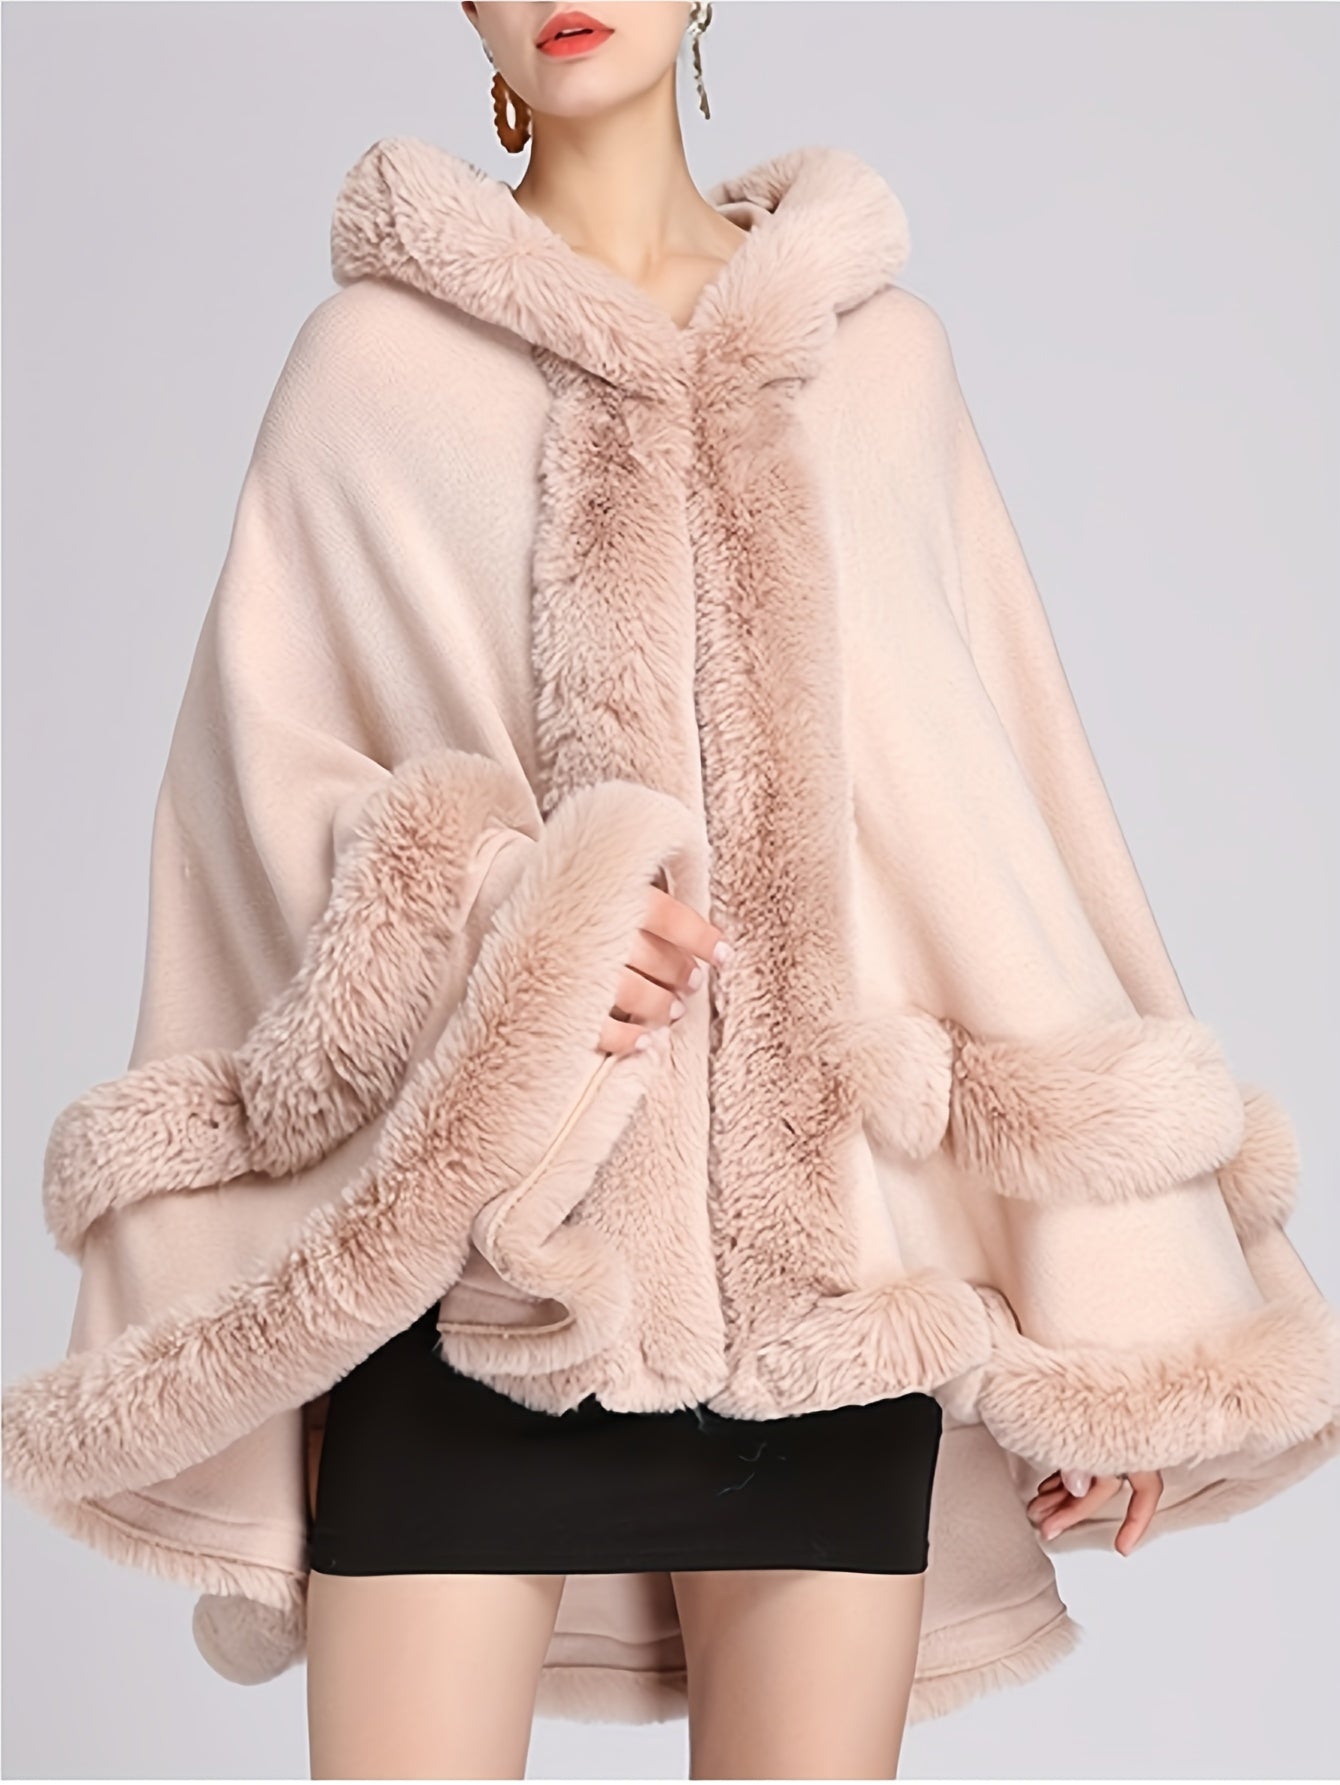 Solid Faux Fur Trim Cape, Elegant Thermal Tiered Cape For Fall & Winter, Women's Clothing